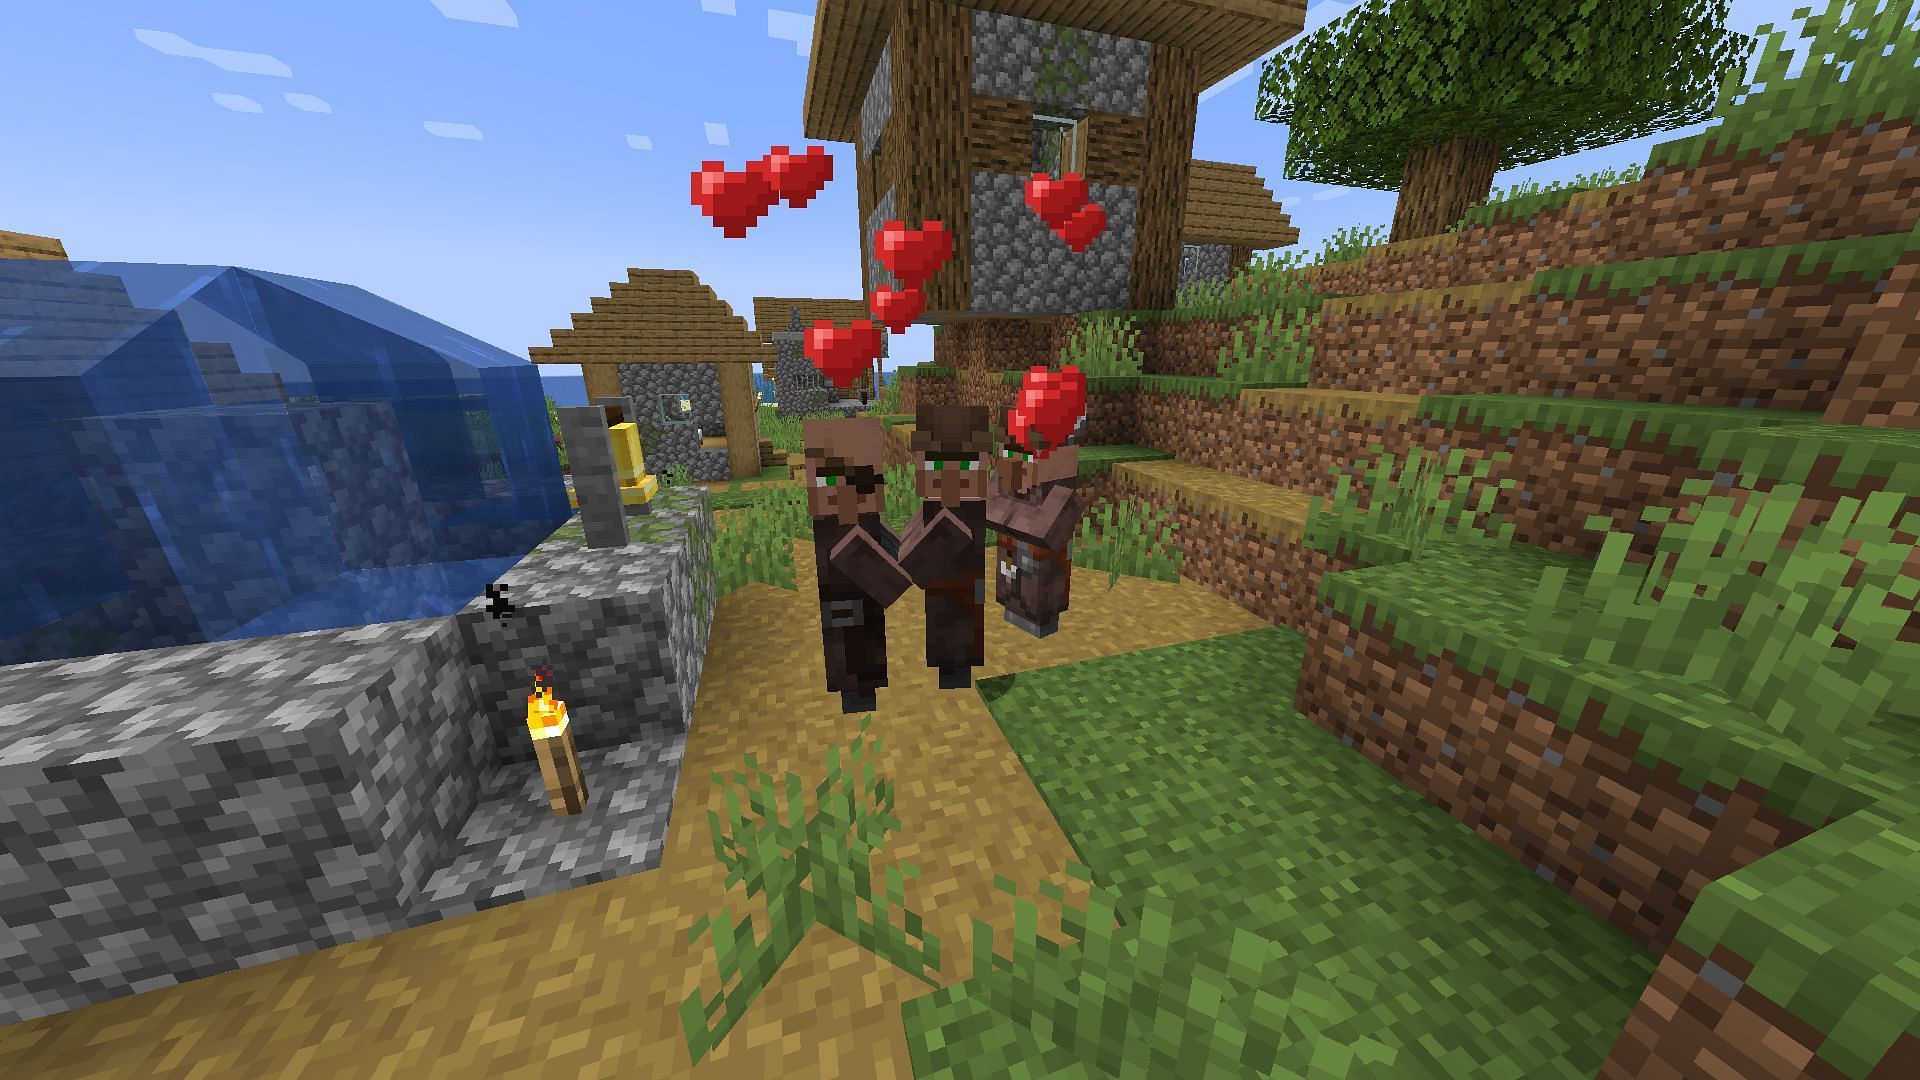 There is a five minute cooldown after villagers breed in Minecraft (Image via Mojang)